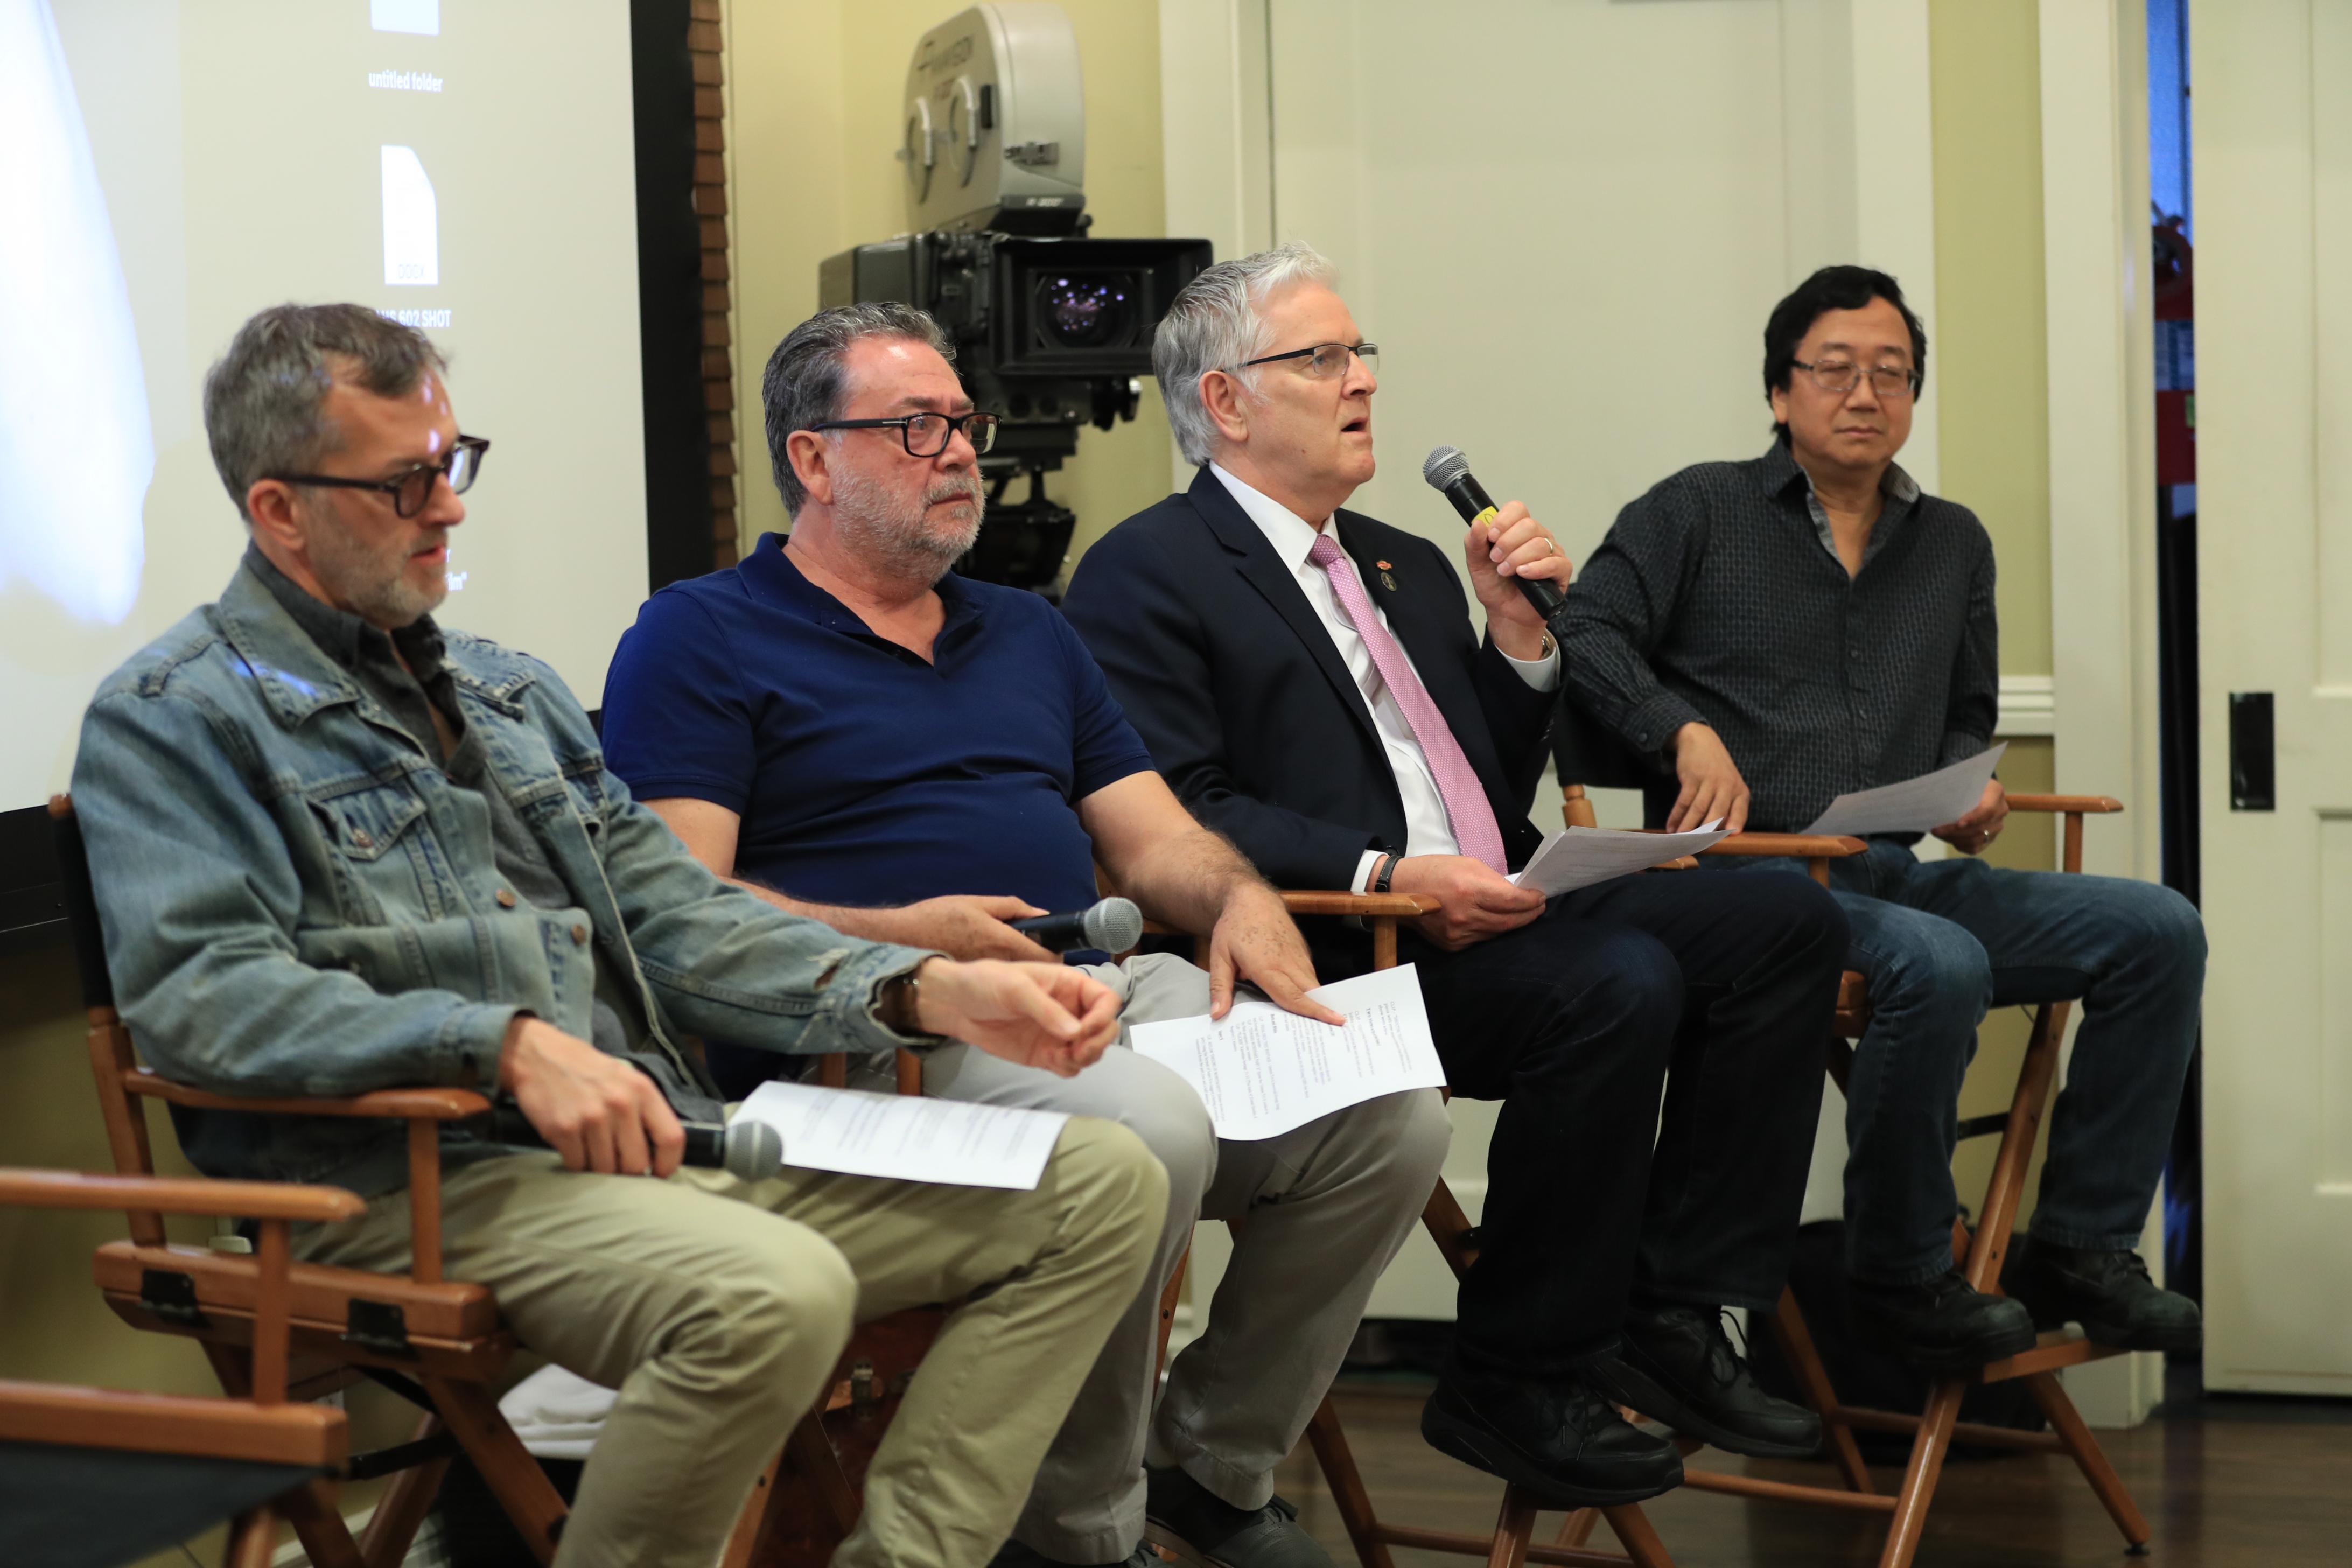 At the ASC Clubhouse, IMAX Chief Quality Officer David Keighley introduces panelists (from left) Mark Worthington, Guillermo Navarro, ASC, AMC and Michael Goi, ASC. Photo by James Neihouse, ASC